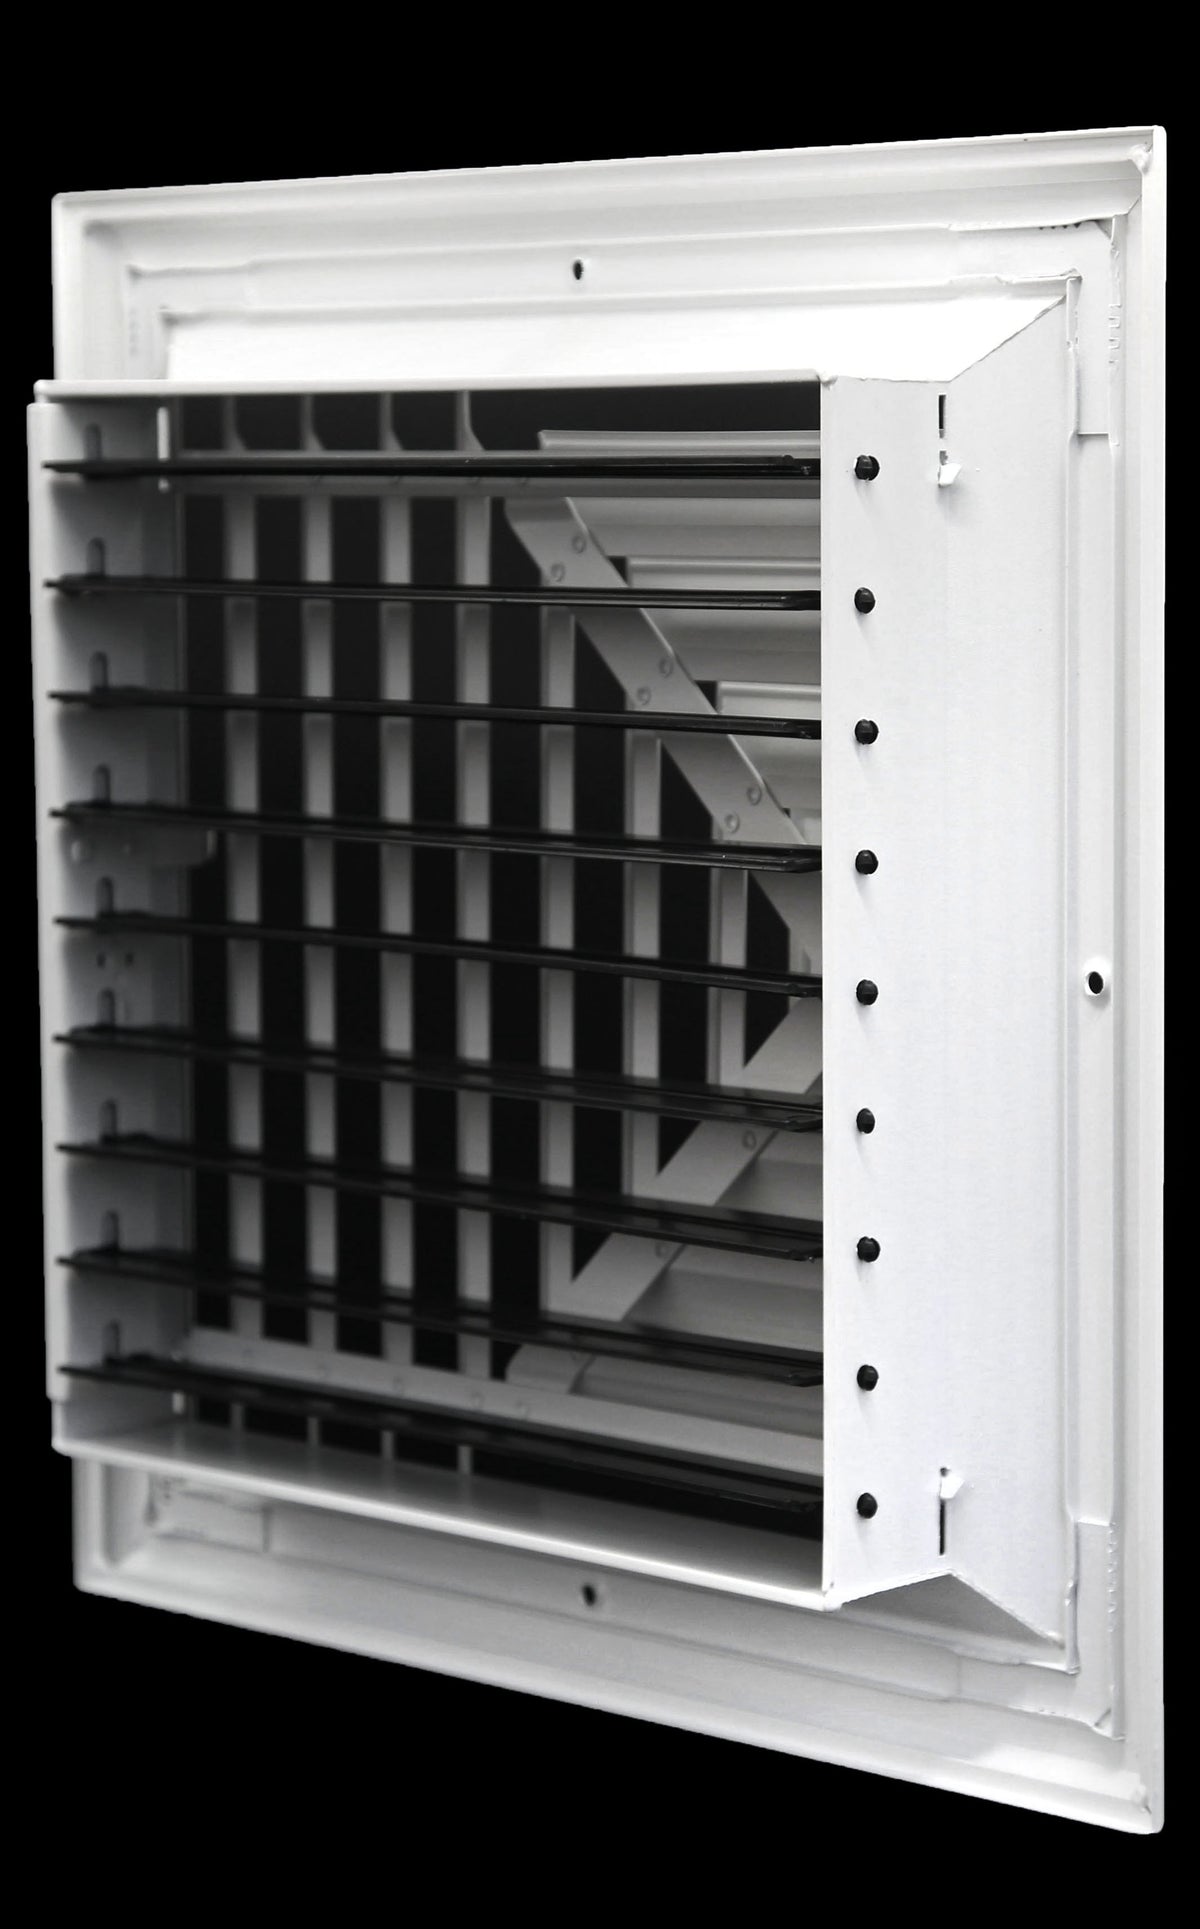 8&quot; x 8&quot; 3-WAY SUPPLY GRILLE - DUCT COVER &amp; DIFFUSER - LOW NOISE - For Ceiling - With Opposing Damper Blades